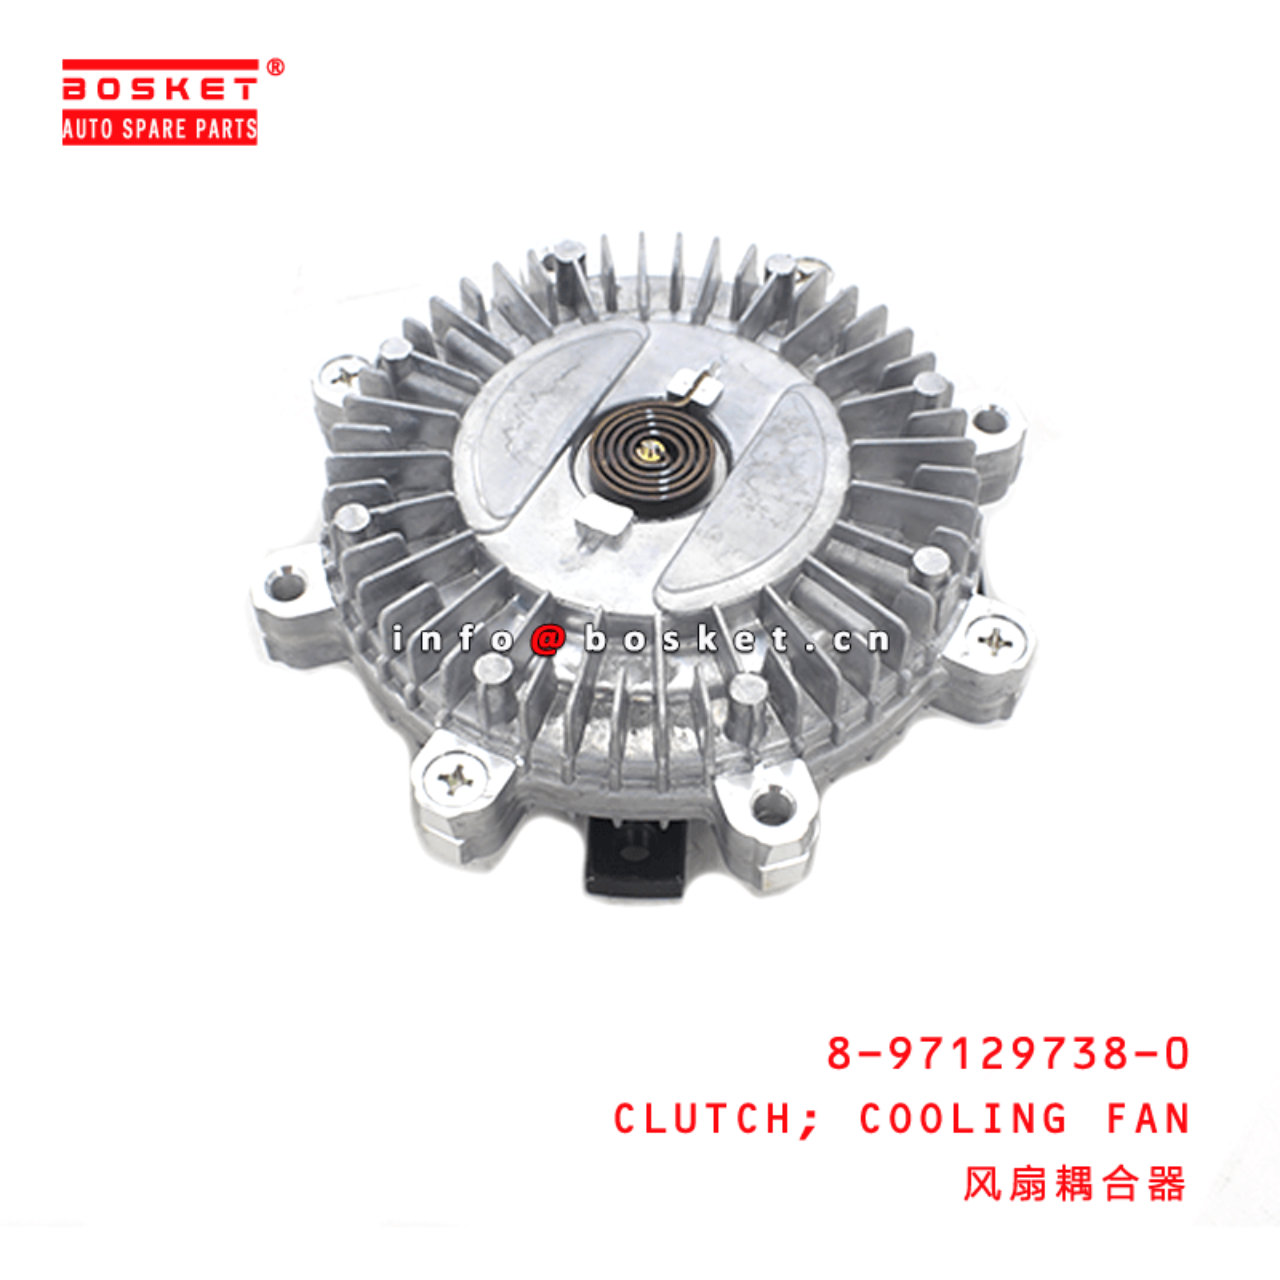  8-97129738-0 Cooling Fan Clutch 8971297380 Suitable for ISUZU NQR66 4HF1